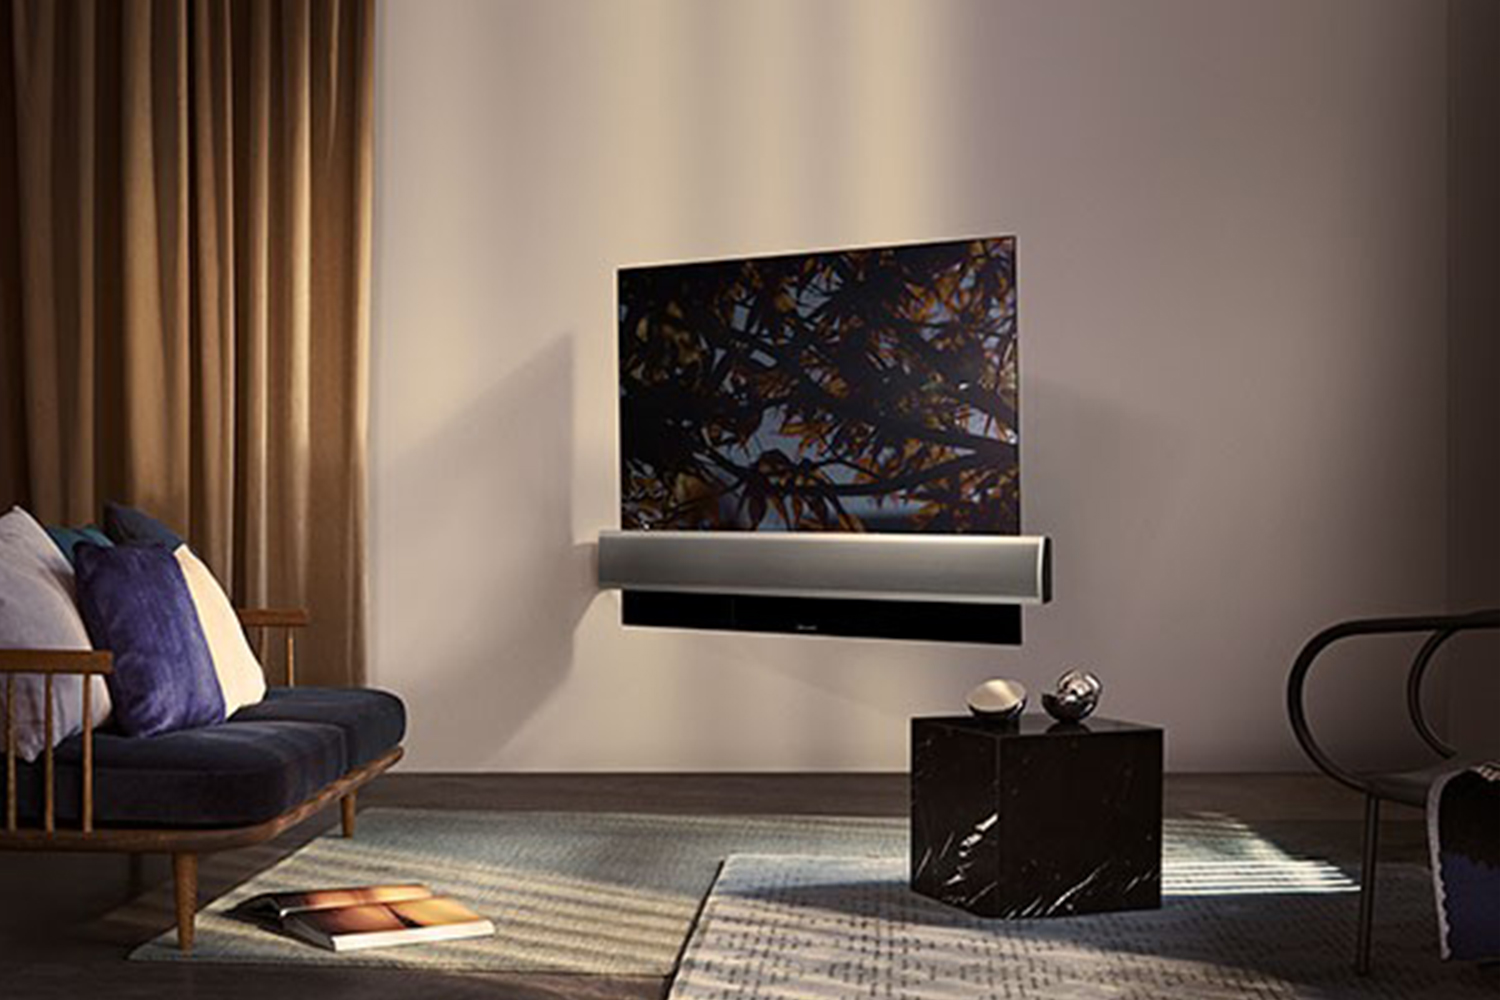 Bang & Olufsen and LG Team Up For BeoVision Eclipse 4K OLED TV Trends